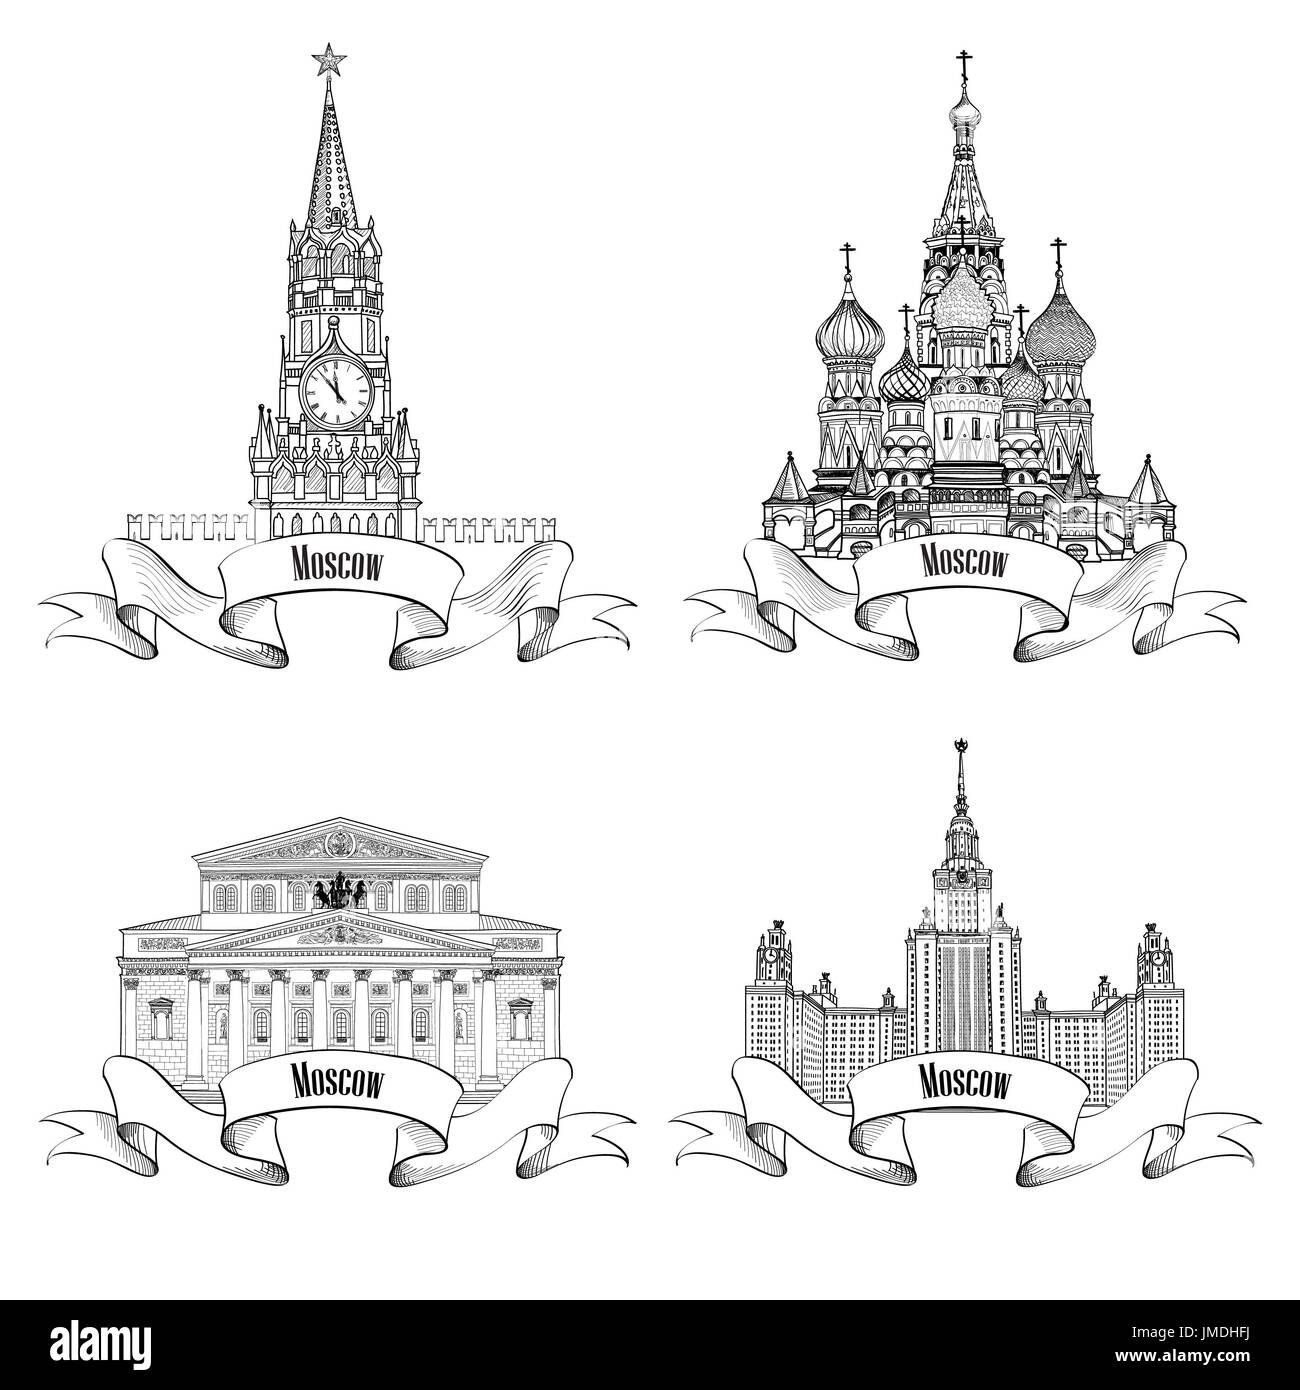 Moscow City Label set. Bolshoy theatre, Spasskaya tower, Moscow State University, Saint Baisil Cathedral. Travel icon vector collection. Stock Photo